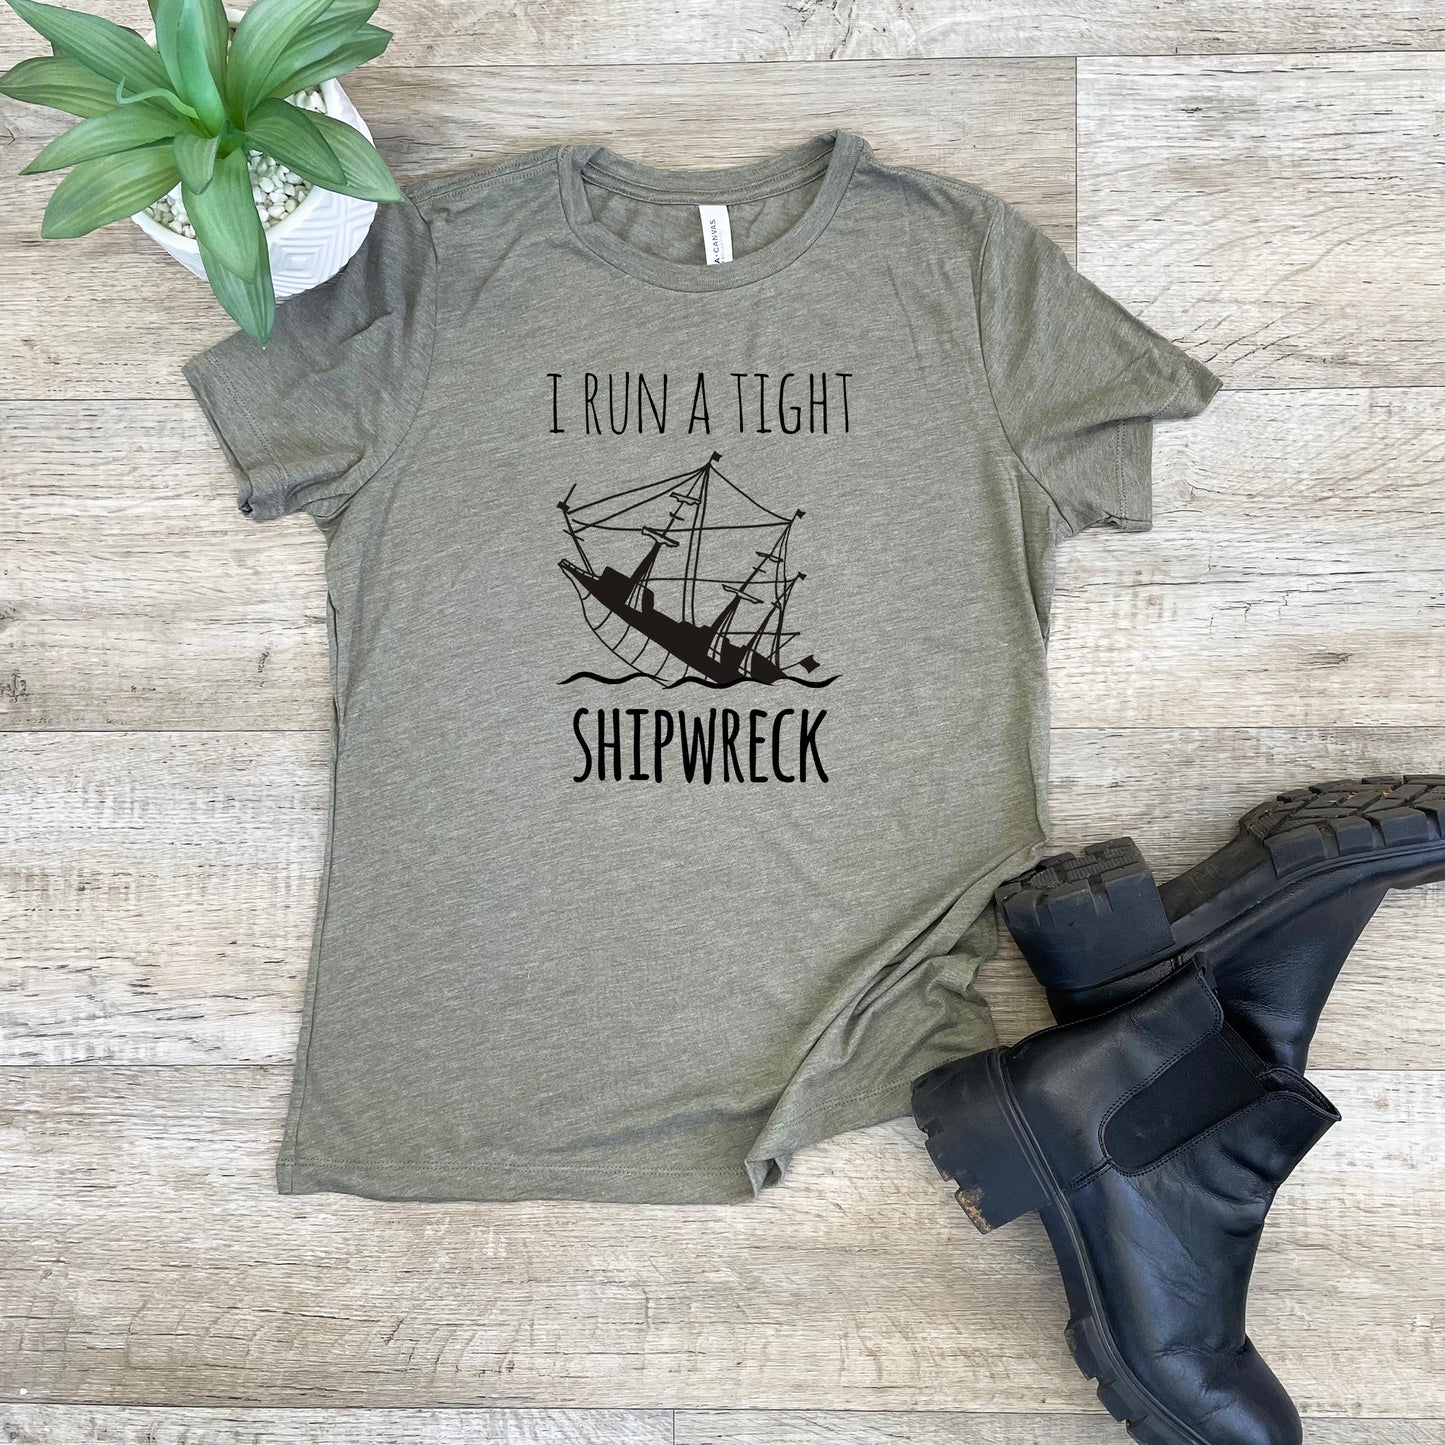 I Run A Tight Shipwreck - Women's Crew Tee - Olive or Dusty Blue